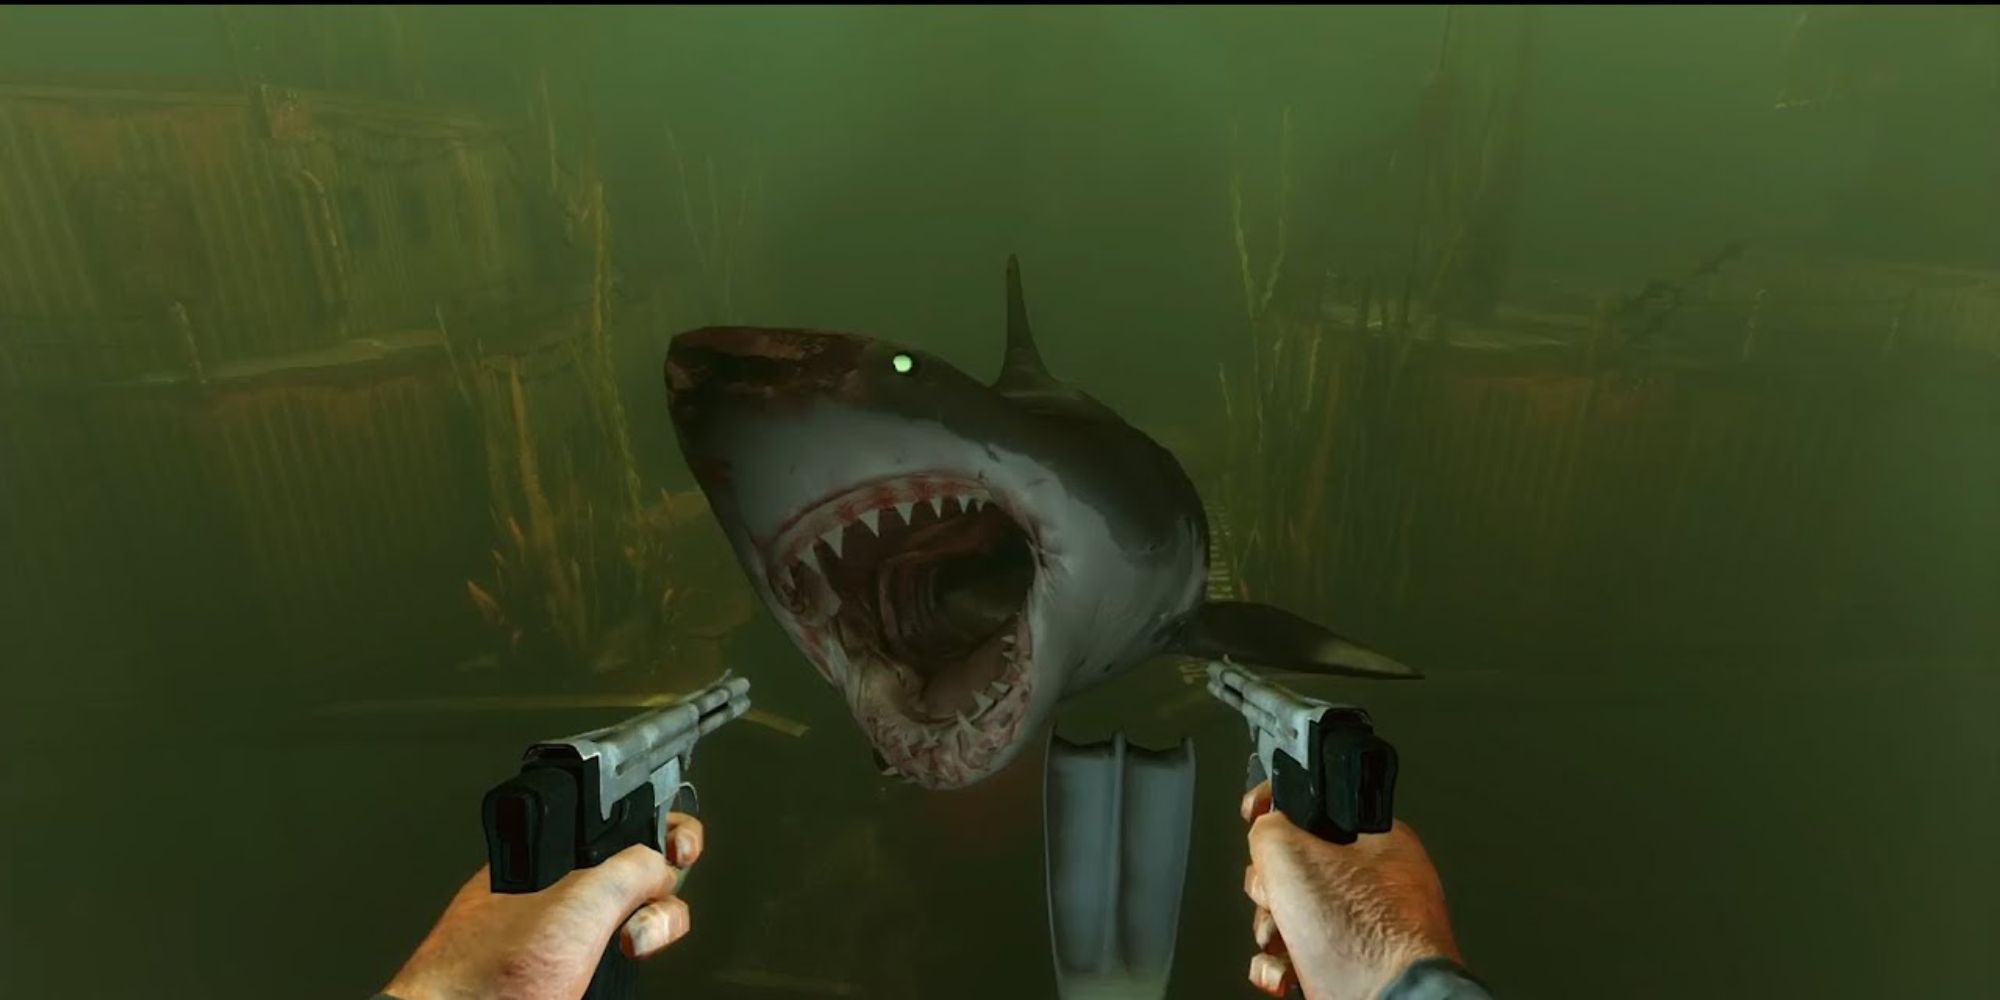 There's a big giant shark hurtling towards the player.